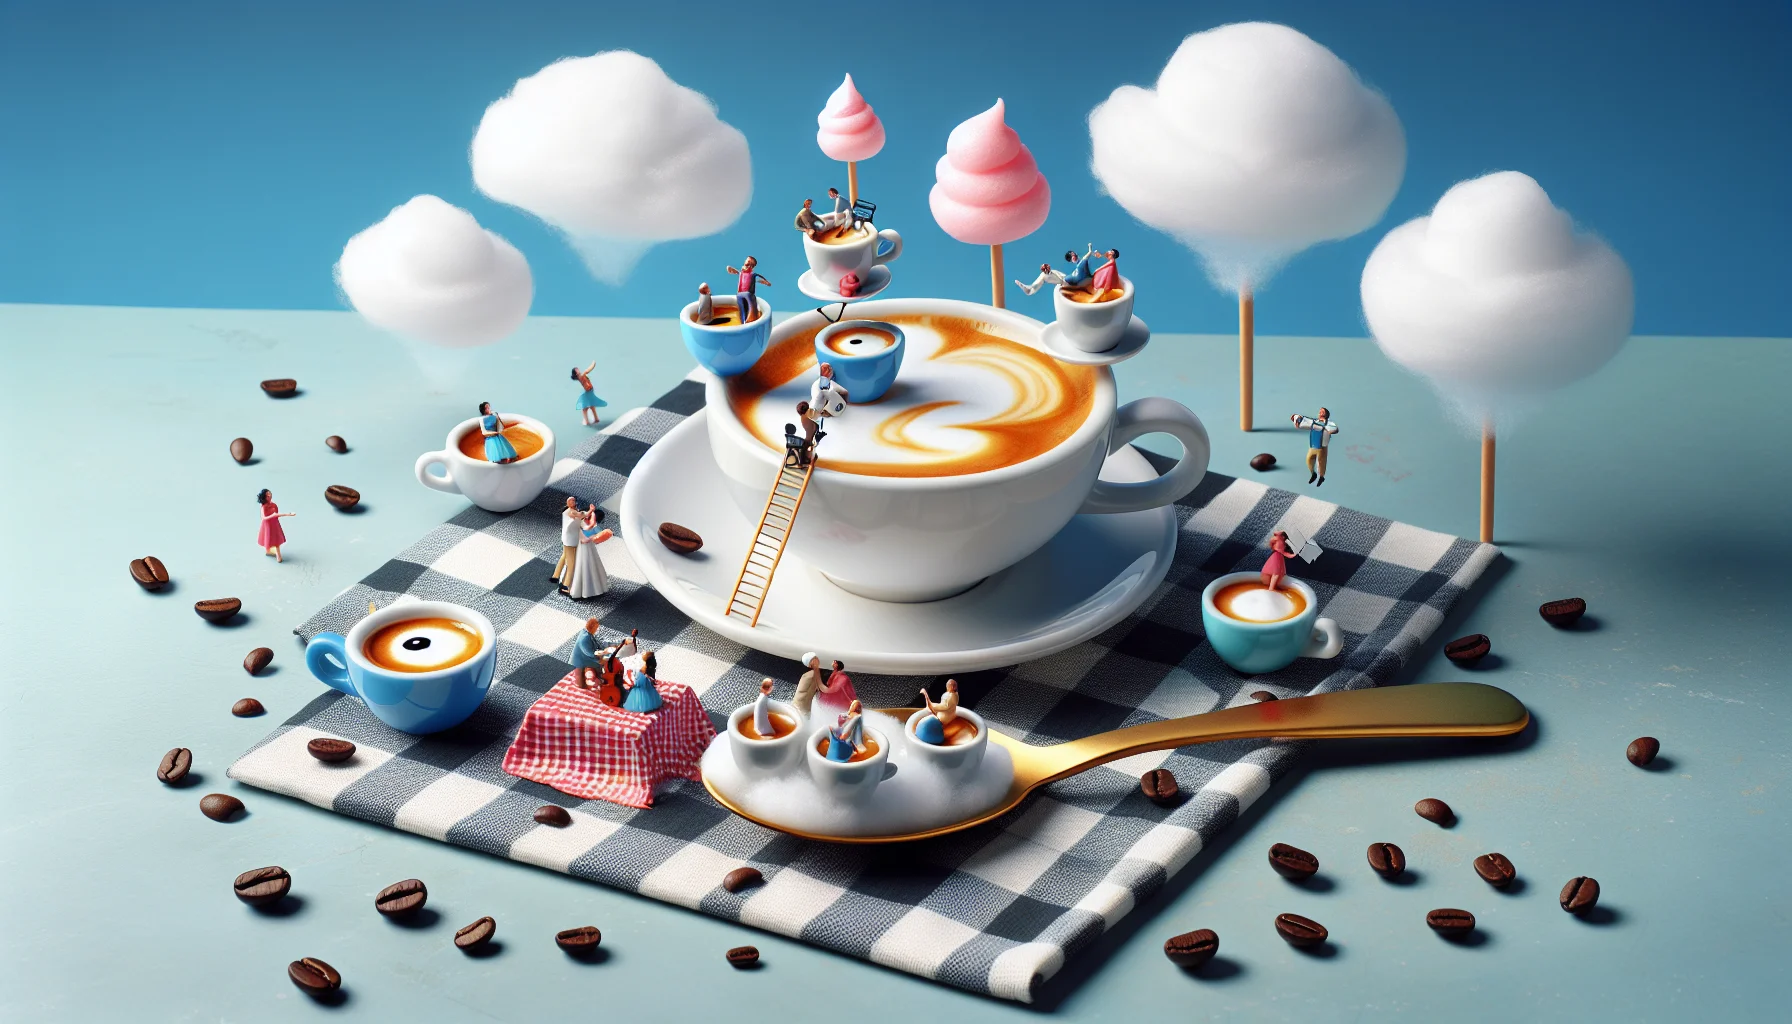 Create a playful and charming scene filled with espresso cups presented in an amusing and unexpected scenario. Imagine that the espresso cups are personalities themselves, indulging in various activities like having a miniature picnic on a chequered cloth under a cotton candy cloud, or enjoying a tiny concert arranged on a spoon. Three espresso cups forming a pyramid while a fourth one is trying to climb shows teamwork. Another amusing touch could be an espresso cup trying to dive into a pool of milk foam. This joyful and surreal world of animated espresso cups is designed to bring laughter and entice people to enjoy their coffee.